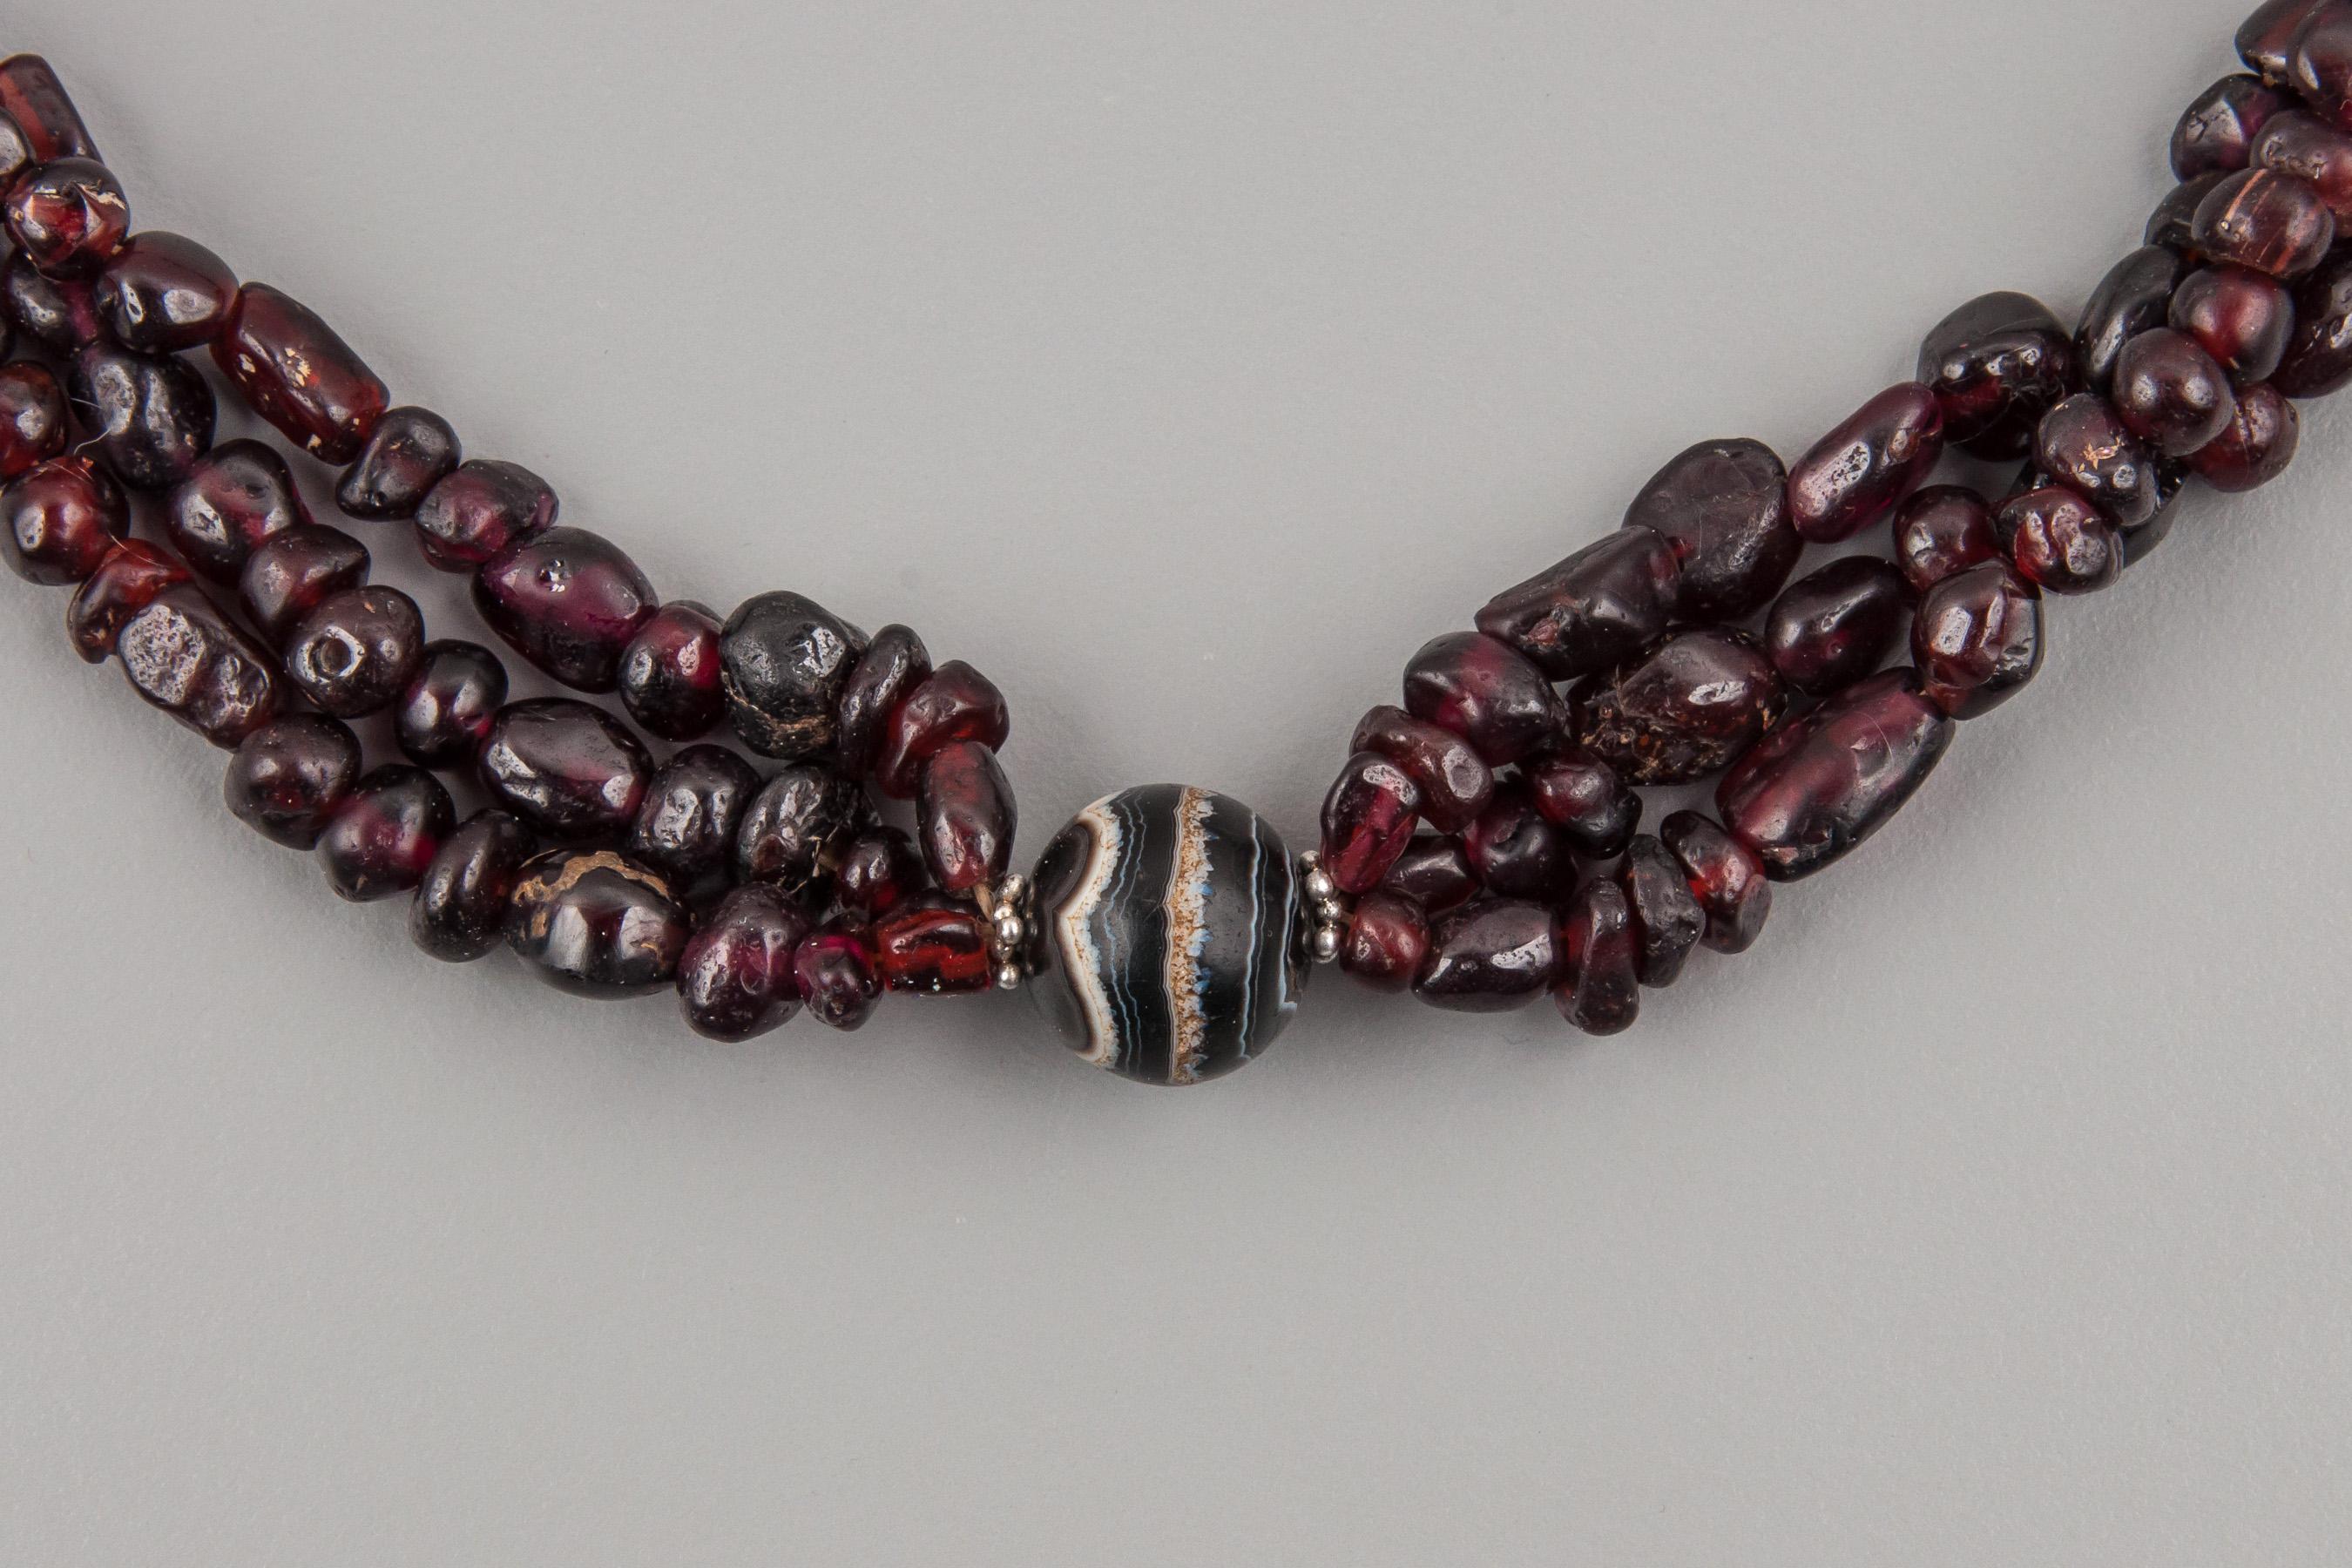 Three strands of ancient garnet beads which are gathered together at five points by five spherical agate beads with white banding. Three of these have lines that encircle the bead and two have banding that goes lengthwise. This produces concentric